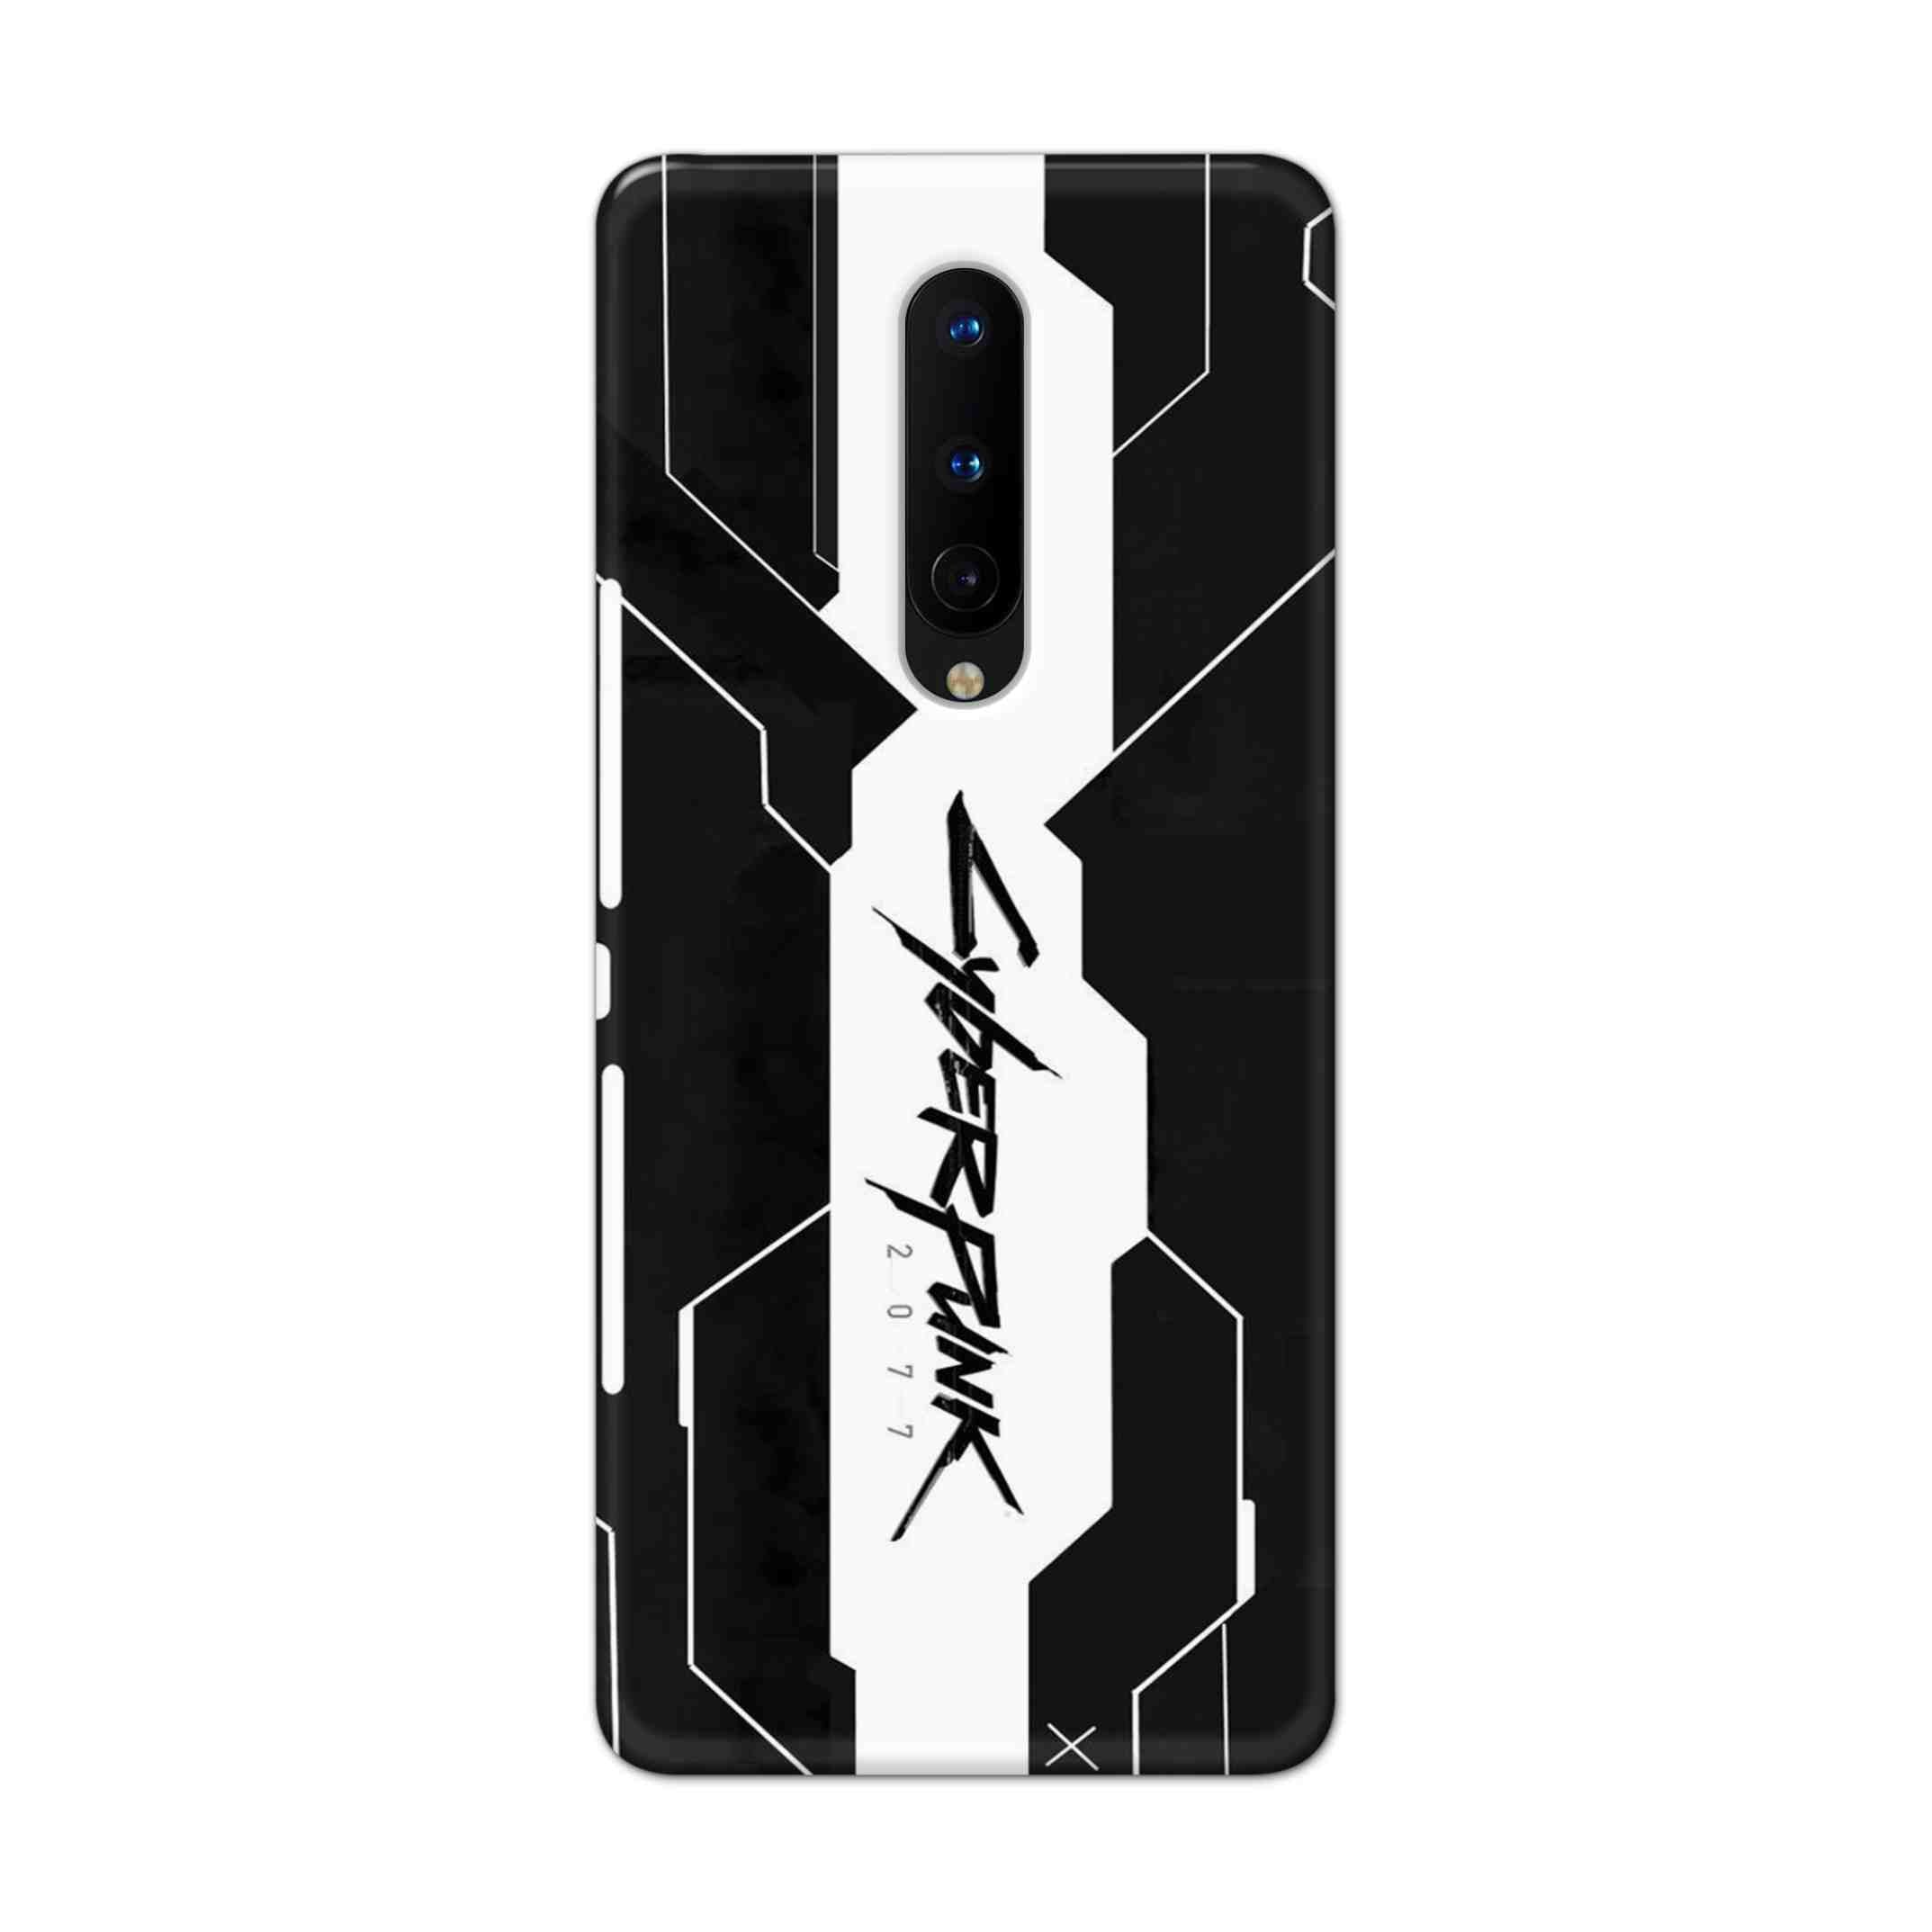 Buy Cyberpunk 2077 Art Hard Back Mobile Phone Case Cover For OnePlus 8 Online